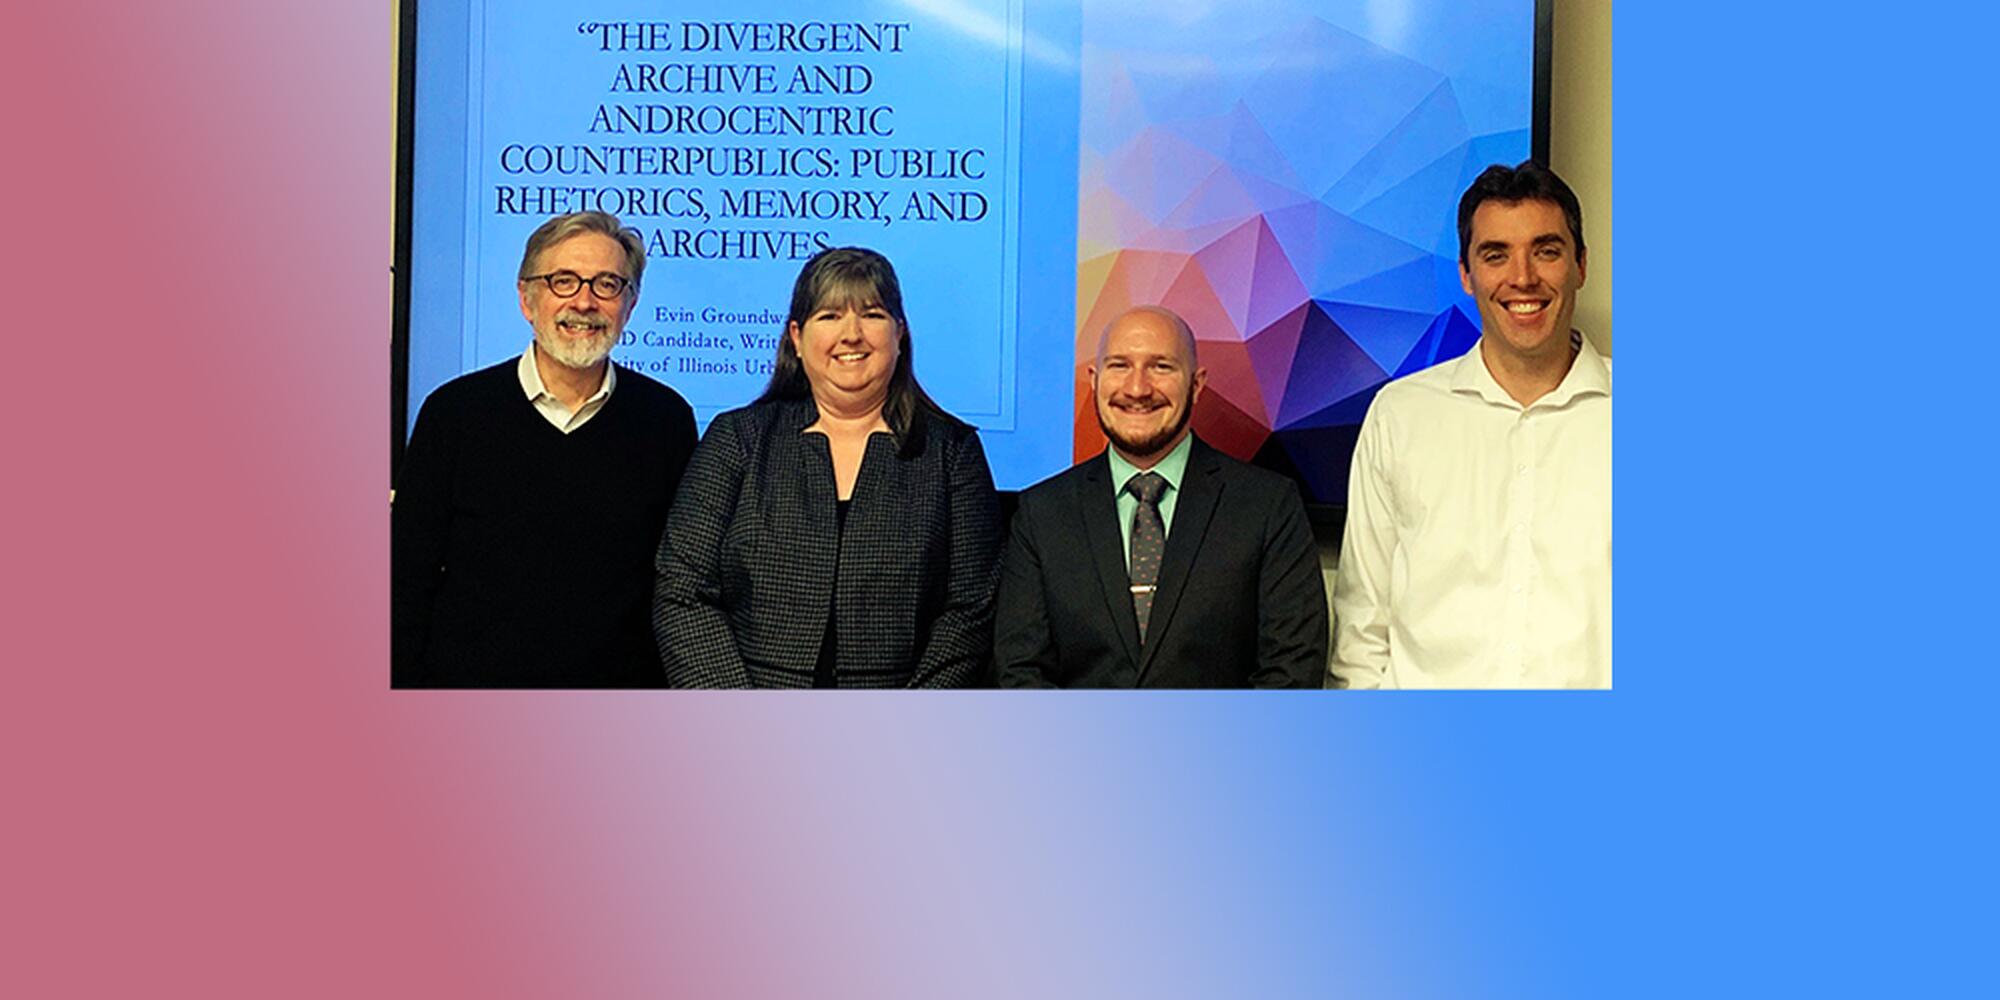 Four white people stand side by side against a cover slide for a dissertation defense; the slide reads "The Divergent Archive and Androcentric Counterpublics: Public Rhetorics, Memory, and Archives." One of the people present is a PhD candidate who just defended his work; the other three are professors (a man with grey hair, a beard, sweater, and glasses; a woman wearing a blouse; and a man wearing a white dress shirt).